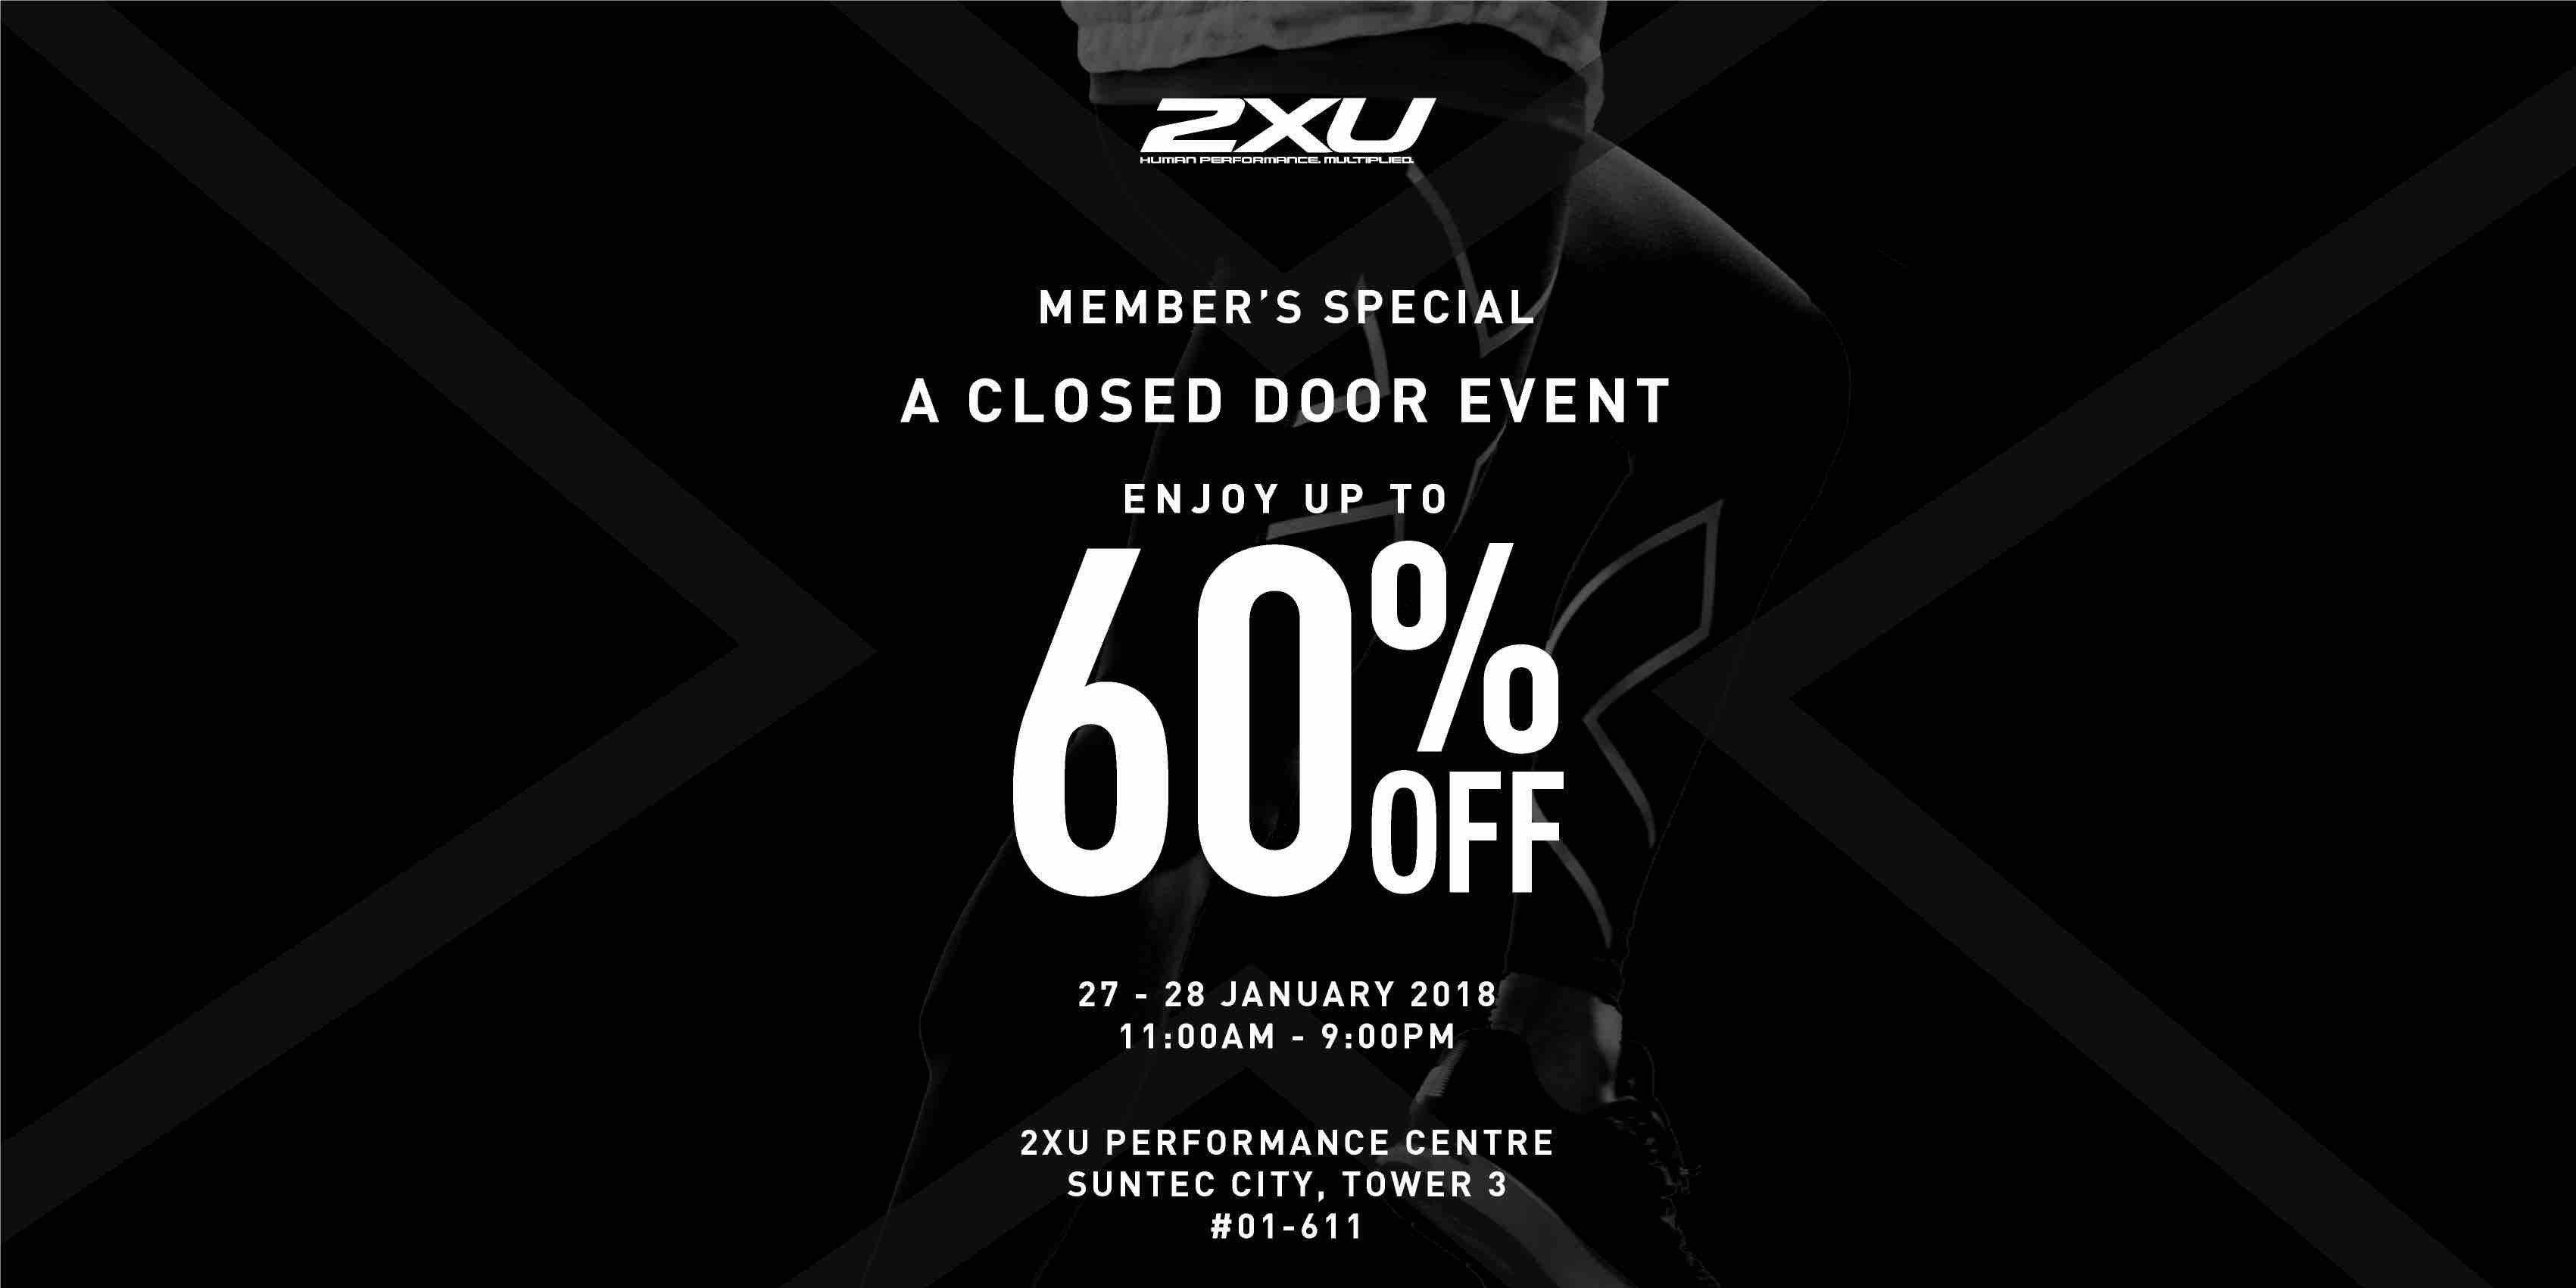 2XU Singapore Members’ Special Closed Door Event 60% Off Promotion 27-28 Jan 2018